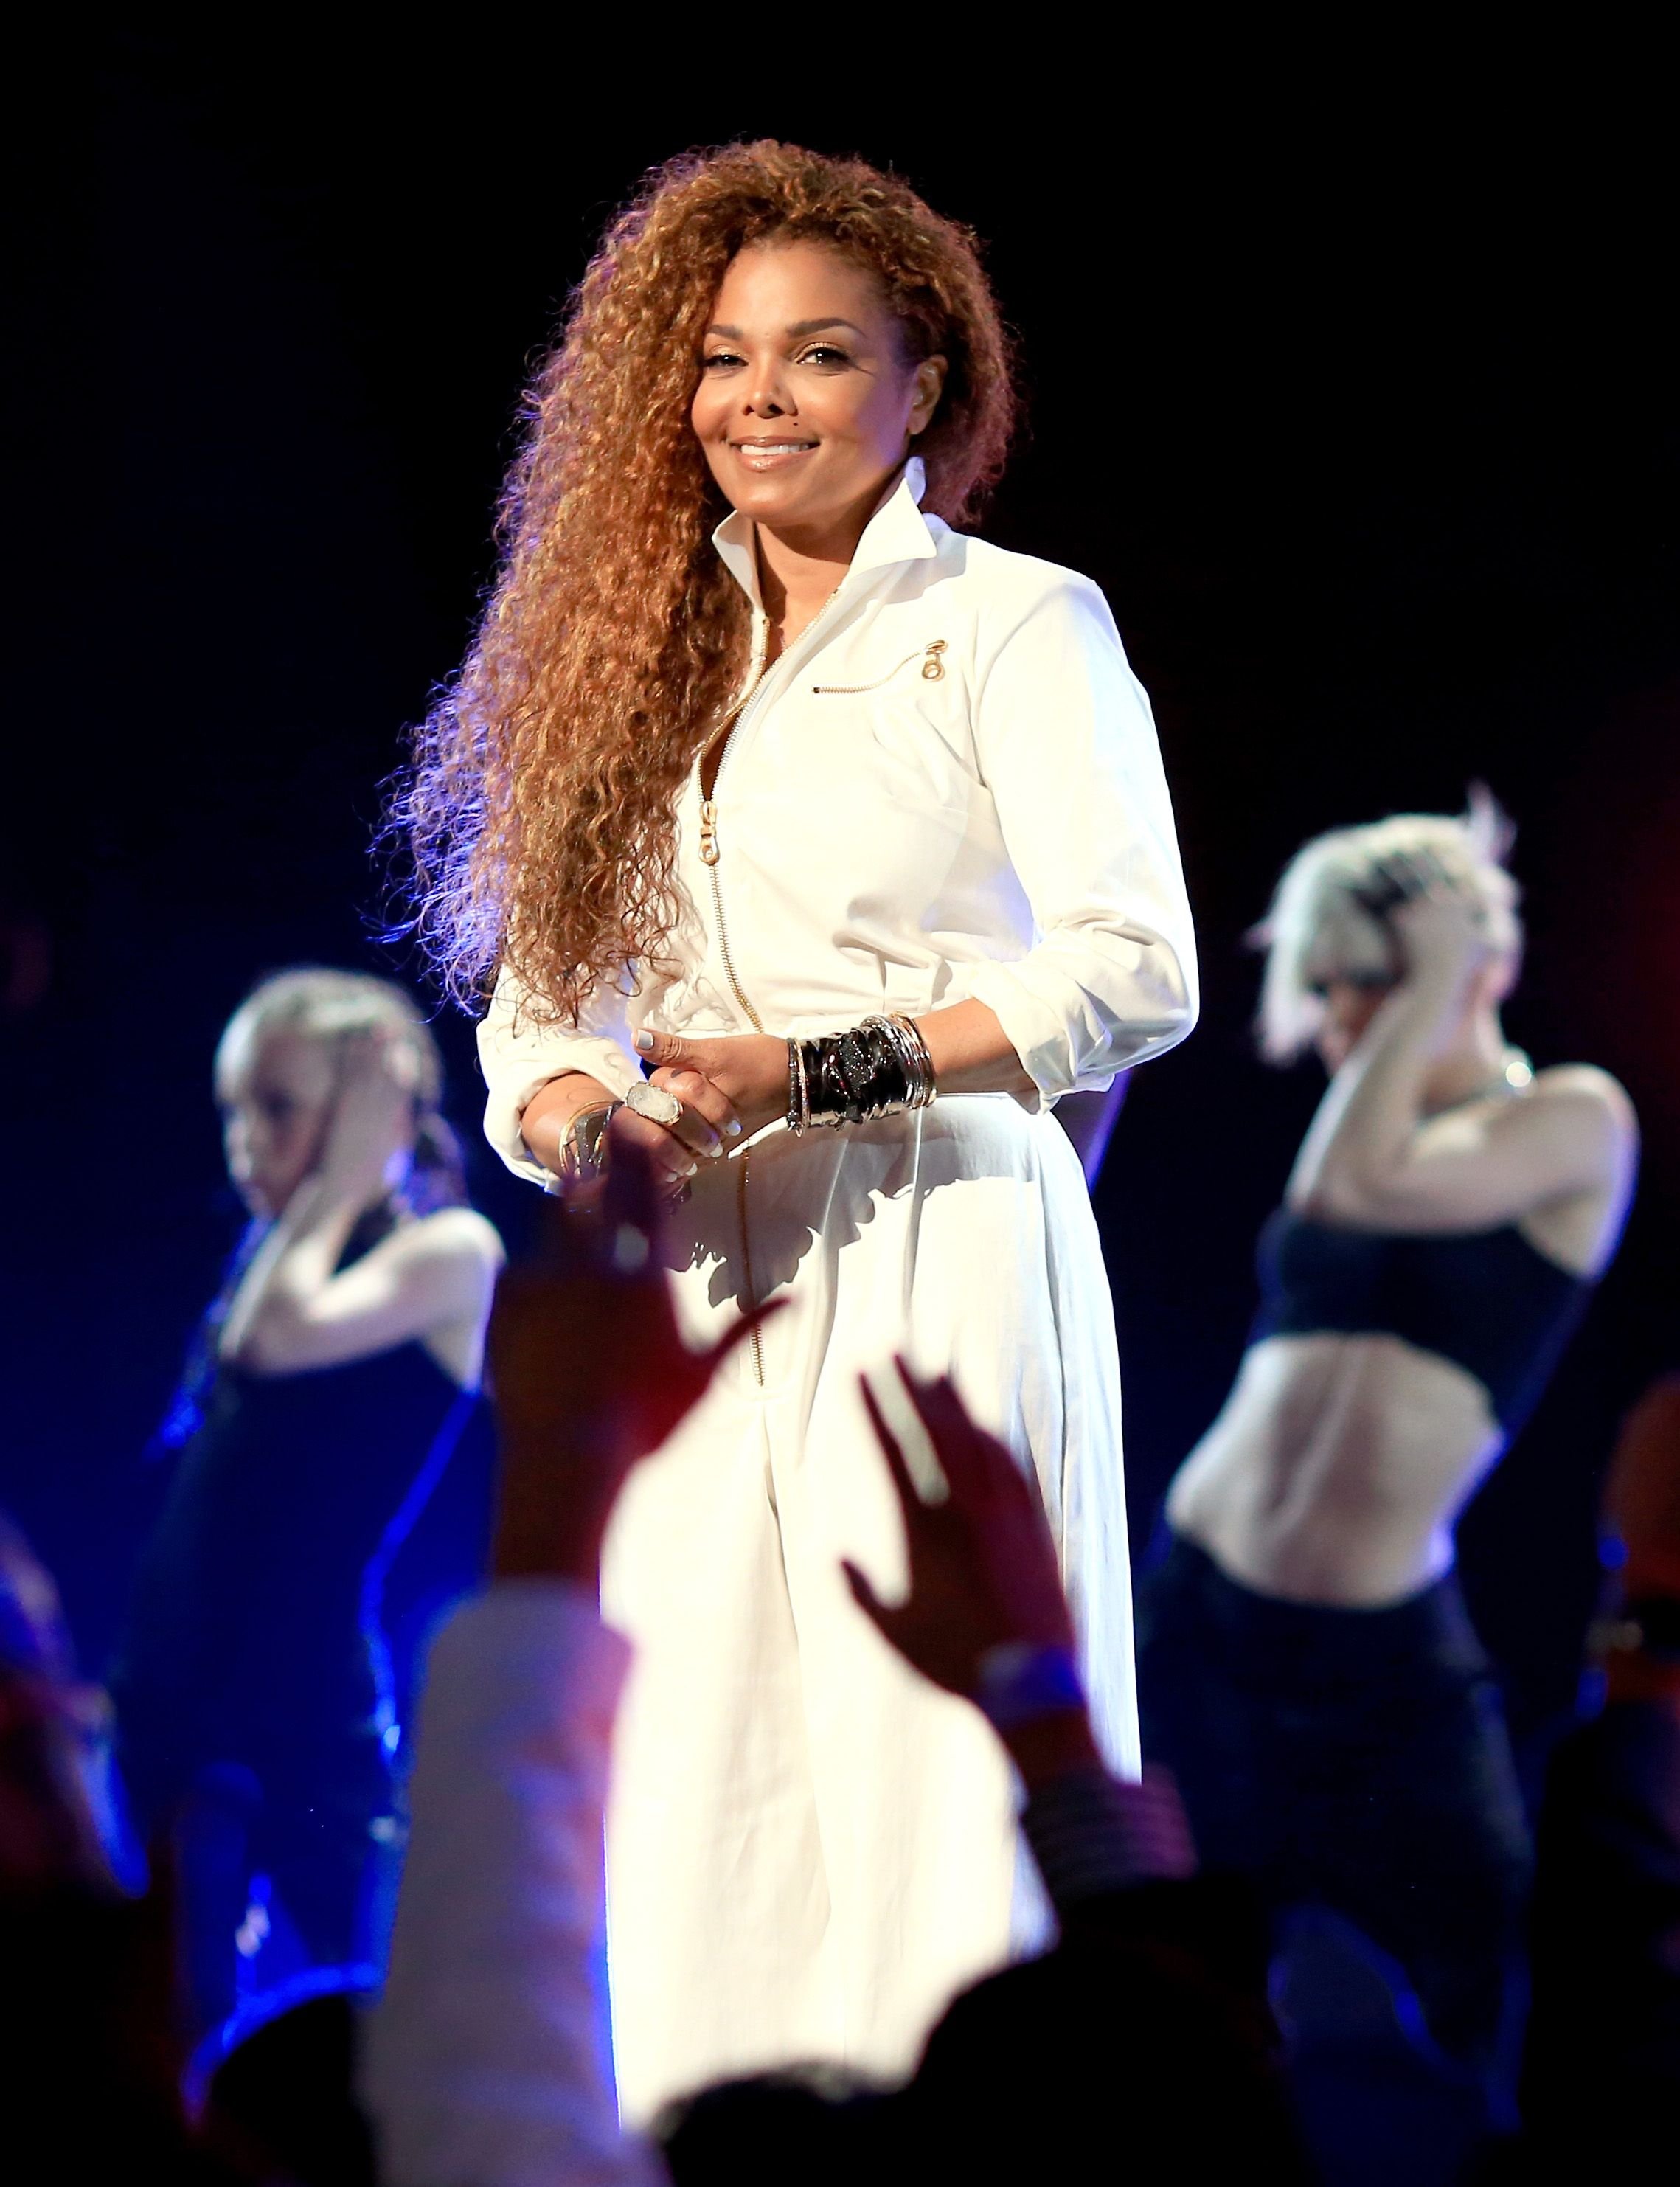 Janet Jackson attends the BET Awards on June 28, 2015 in California. | Source: Getty Images